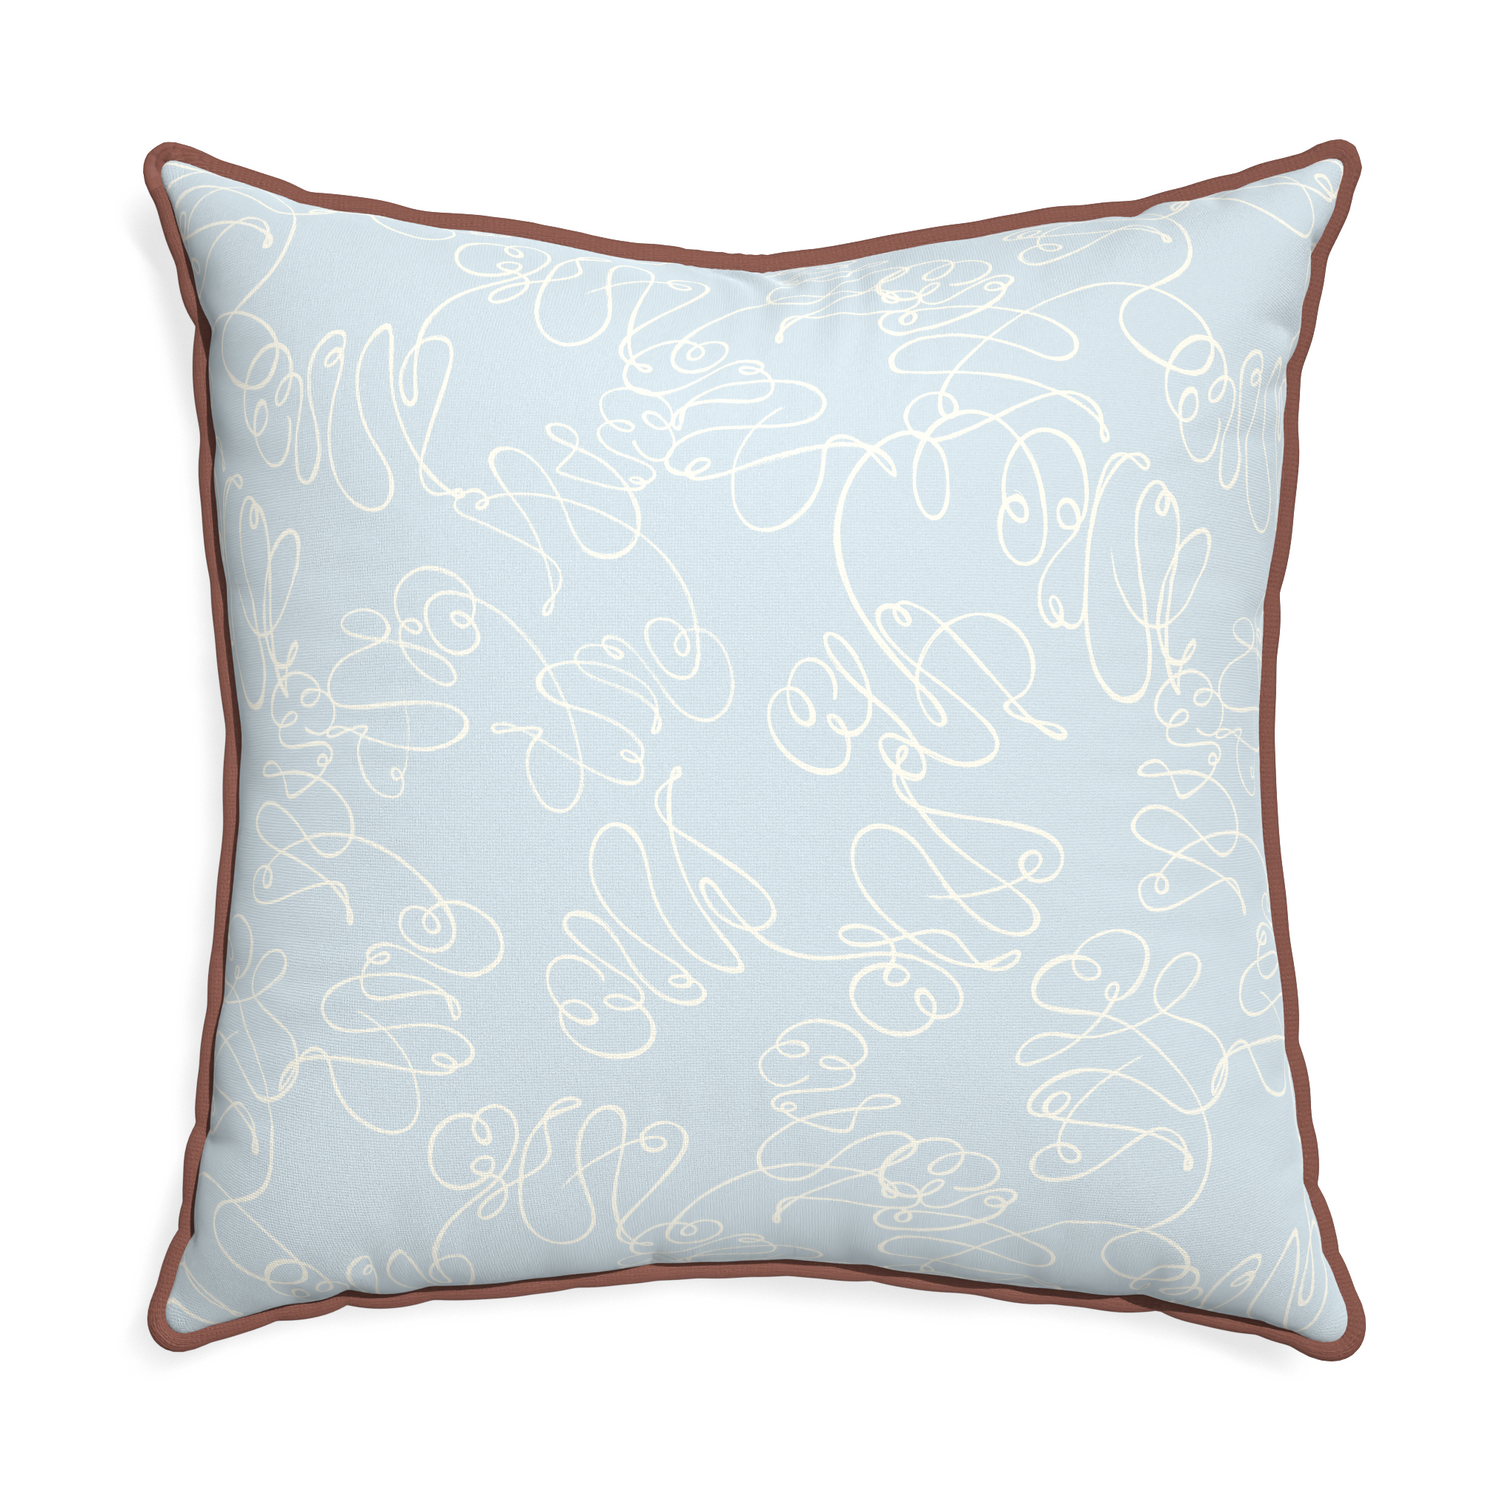 Euro-sham mirabella custom powder blue abstractpillow with w piping on white background